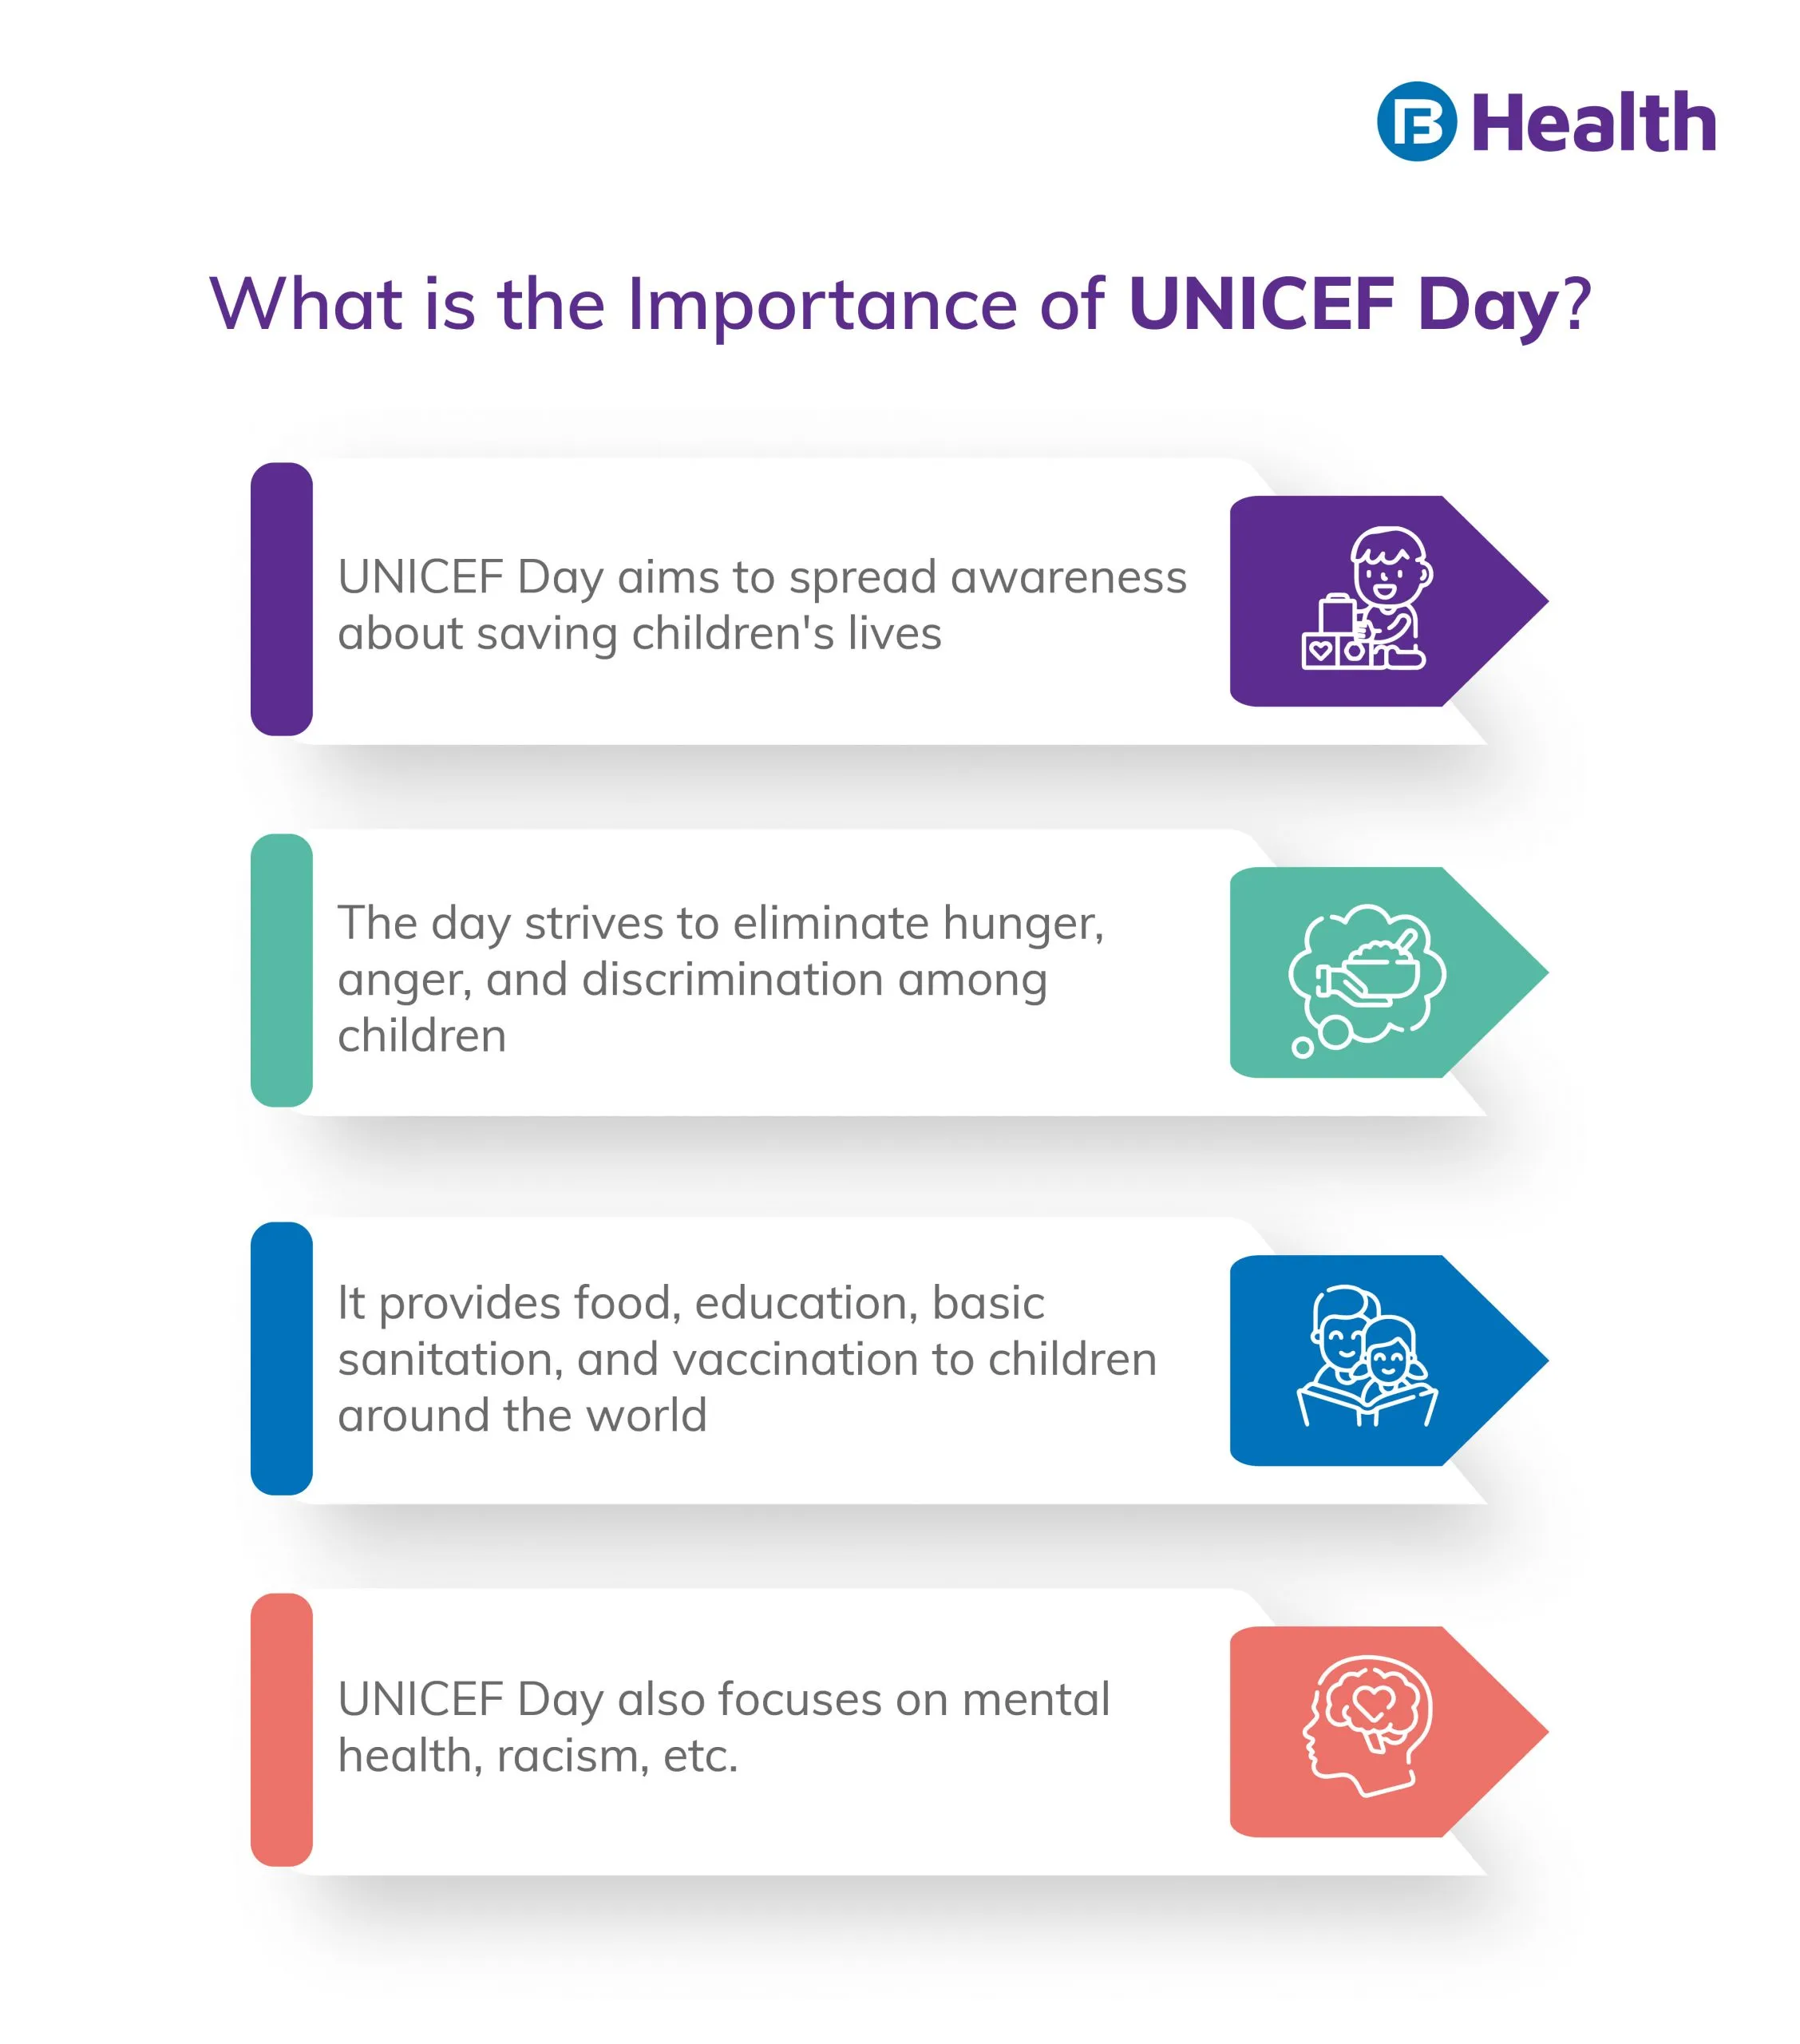 Importance of UNICEF Day